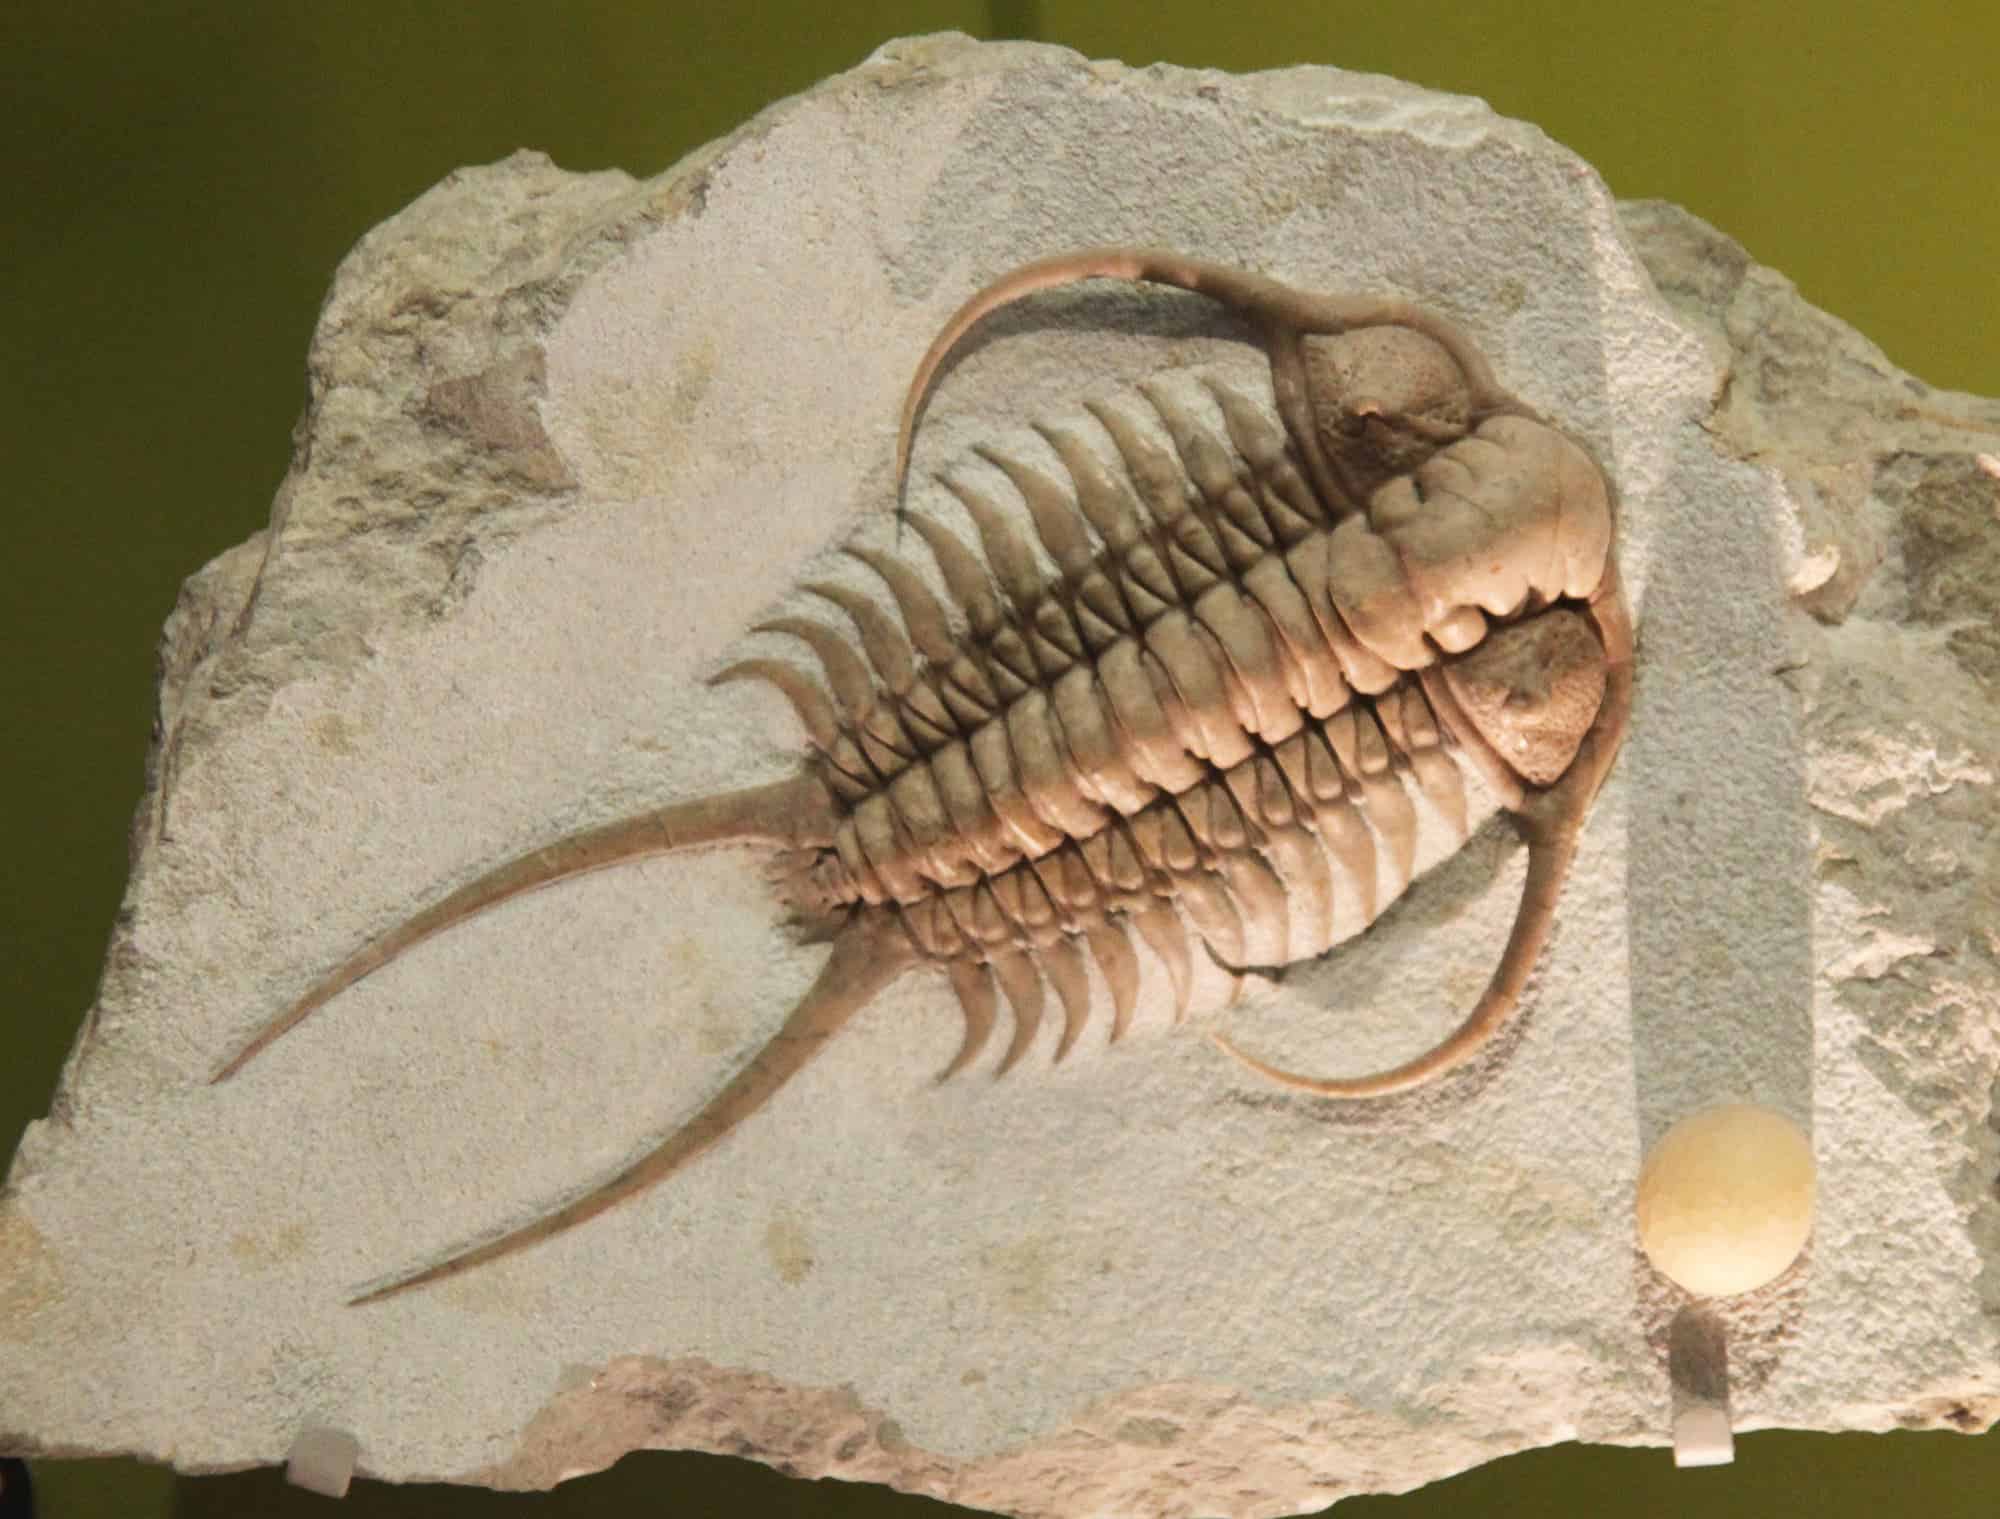 A fossil Cheirurus ingricus on display in the Sant Hall of Oceans in the Smithsonian Museum of Natural History. Cheirurus ingricus is a species of trilobite which emerged 500 million years ago. Photo by Tim Evanson.